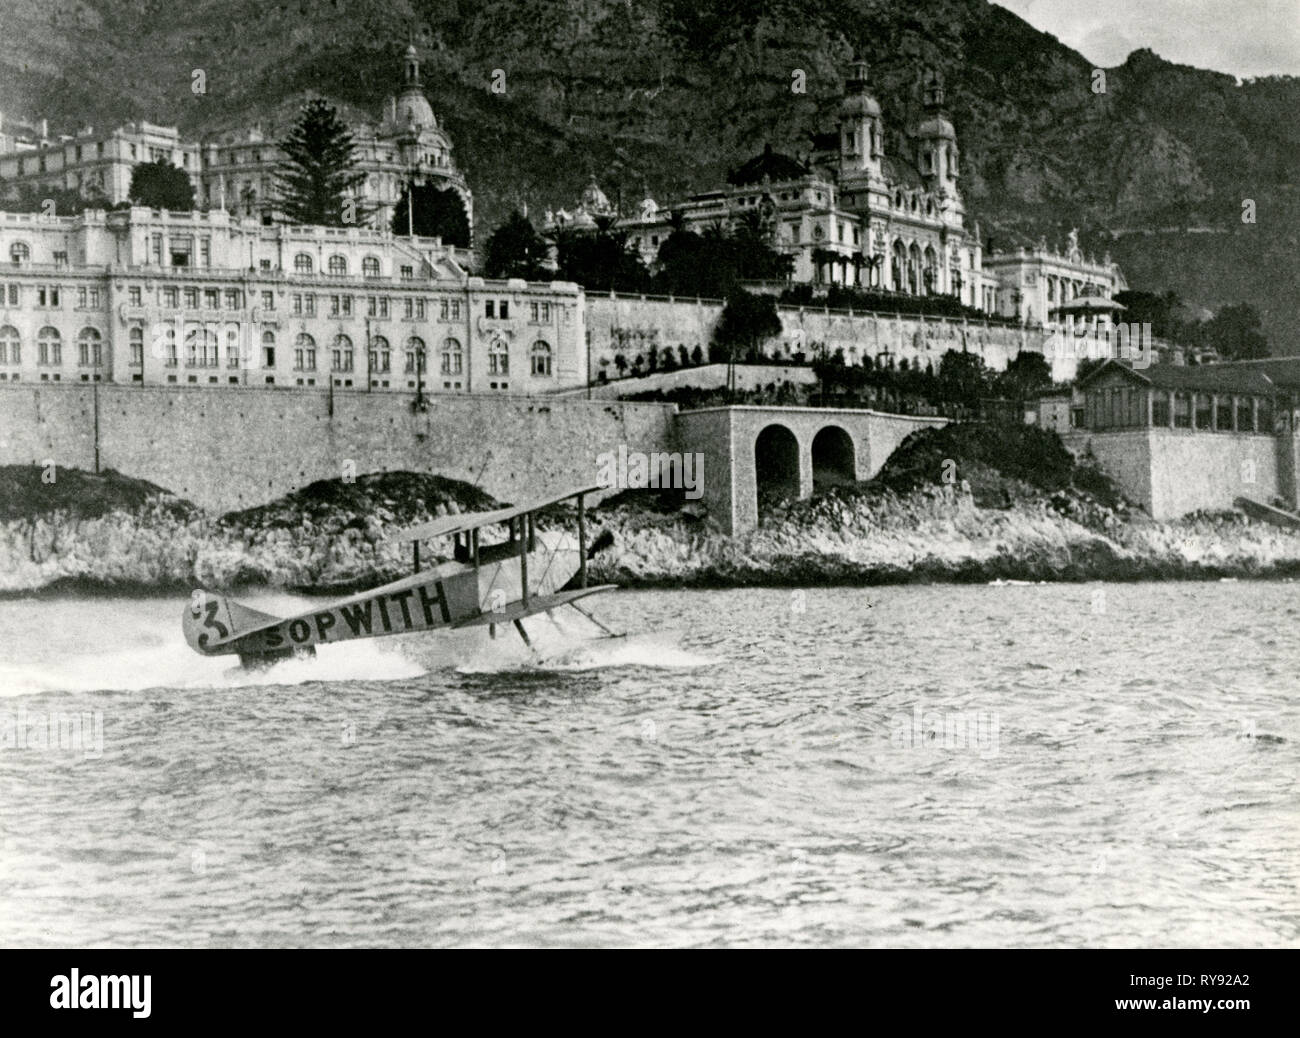 Sopwith 100 Hp entrant at the Monaco Schneider Cup. Pilot - Howard Pixton, a hero of British Aviation, who was the first Briton to win the famous Inte Stock Photo